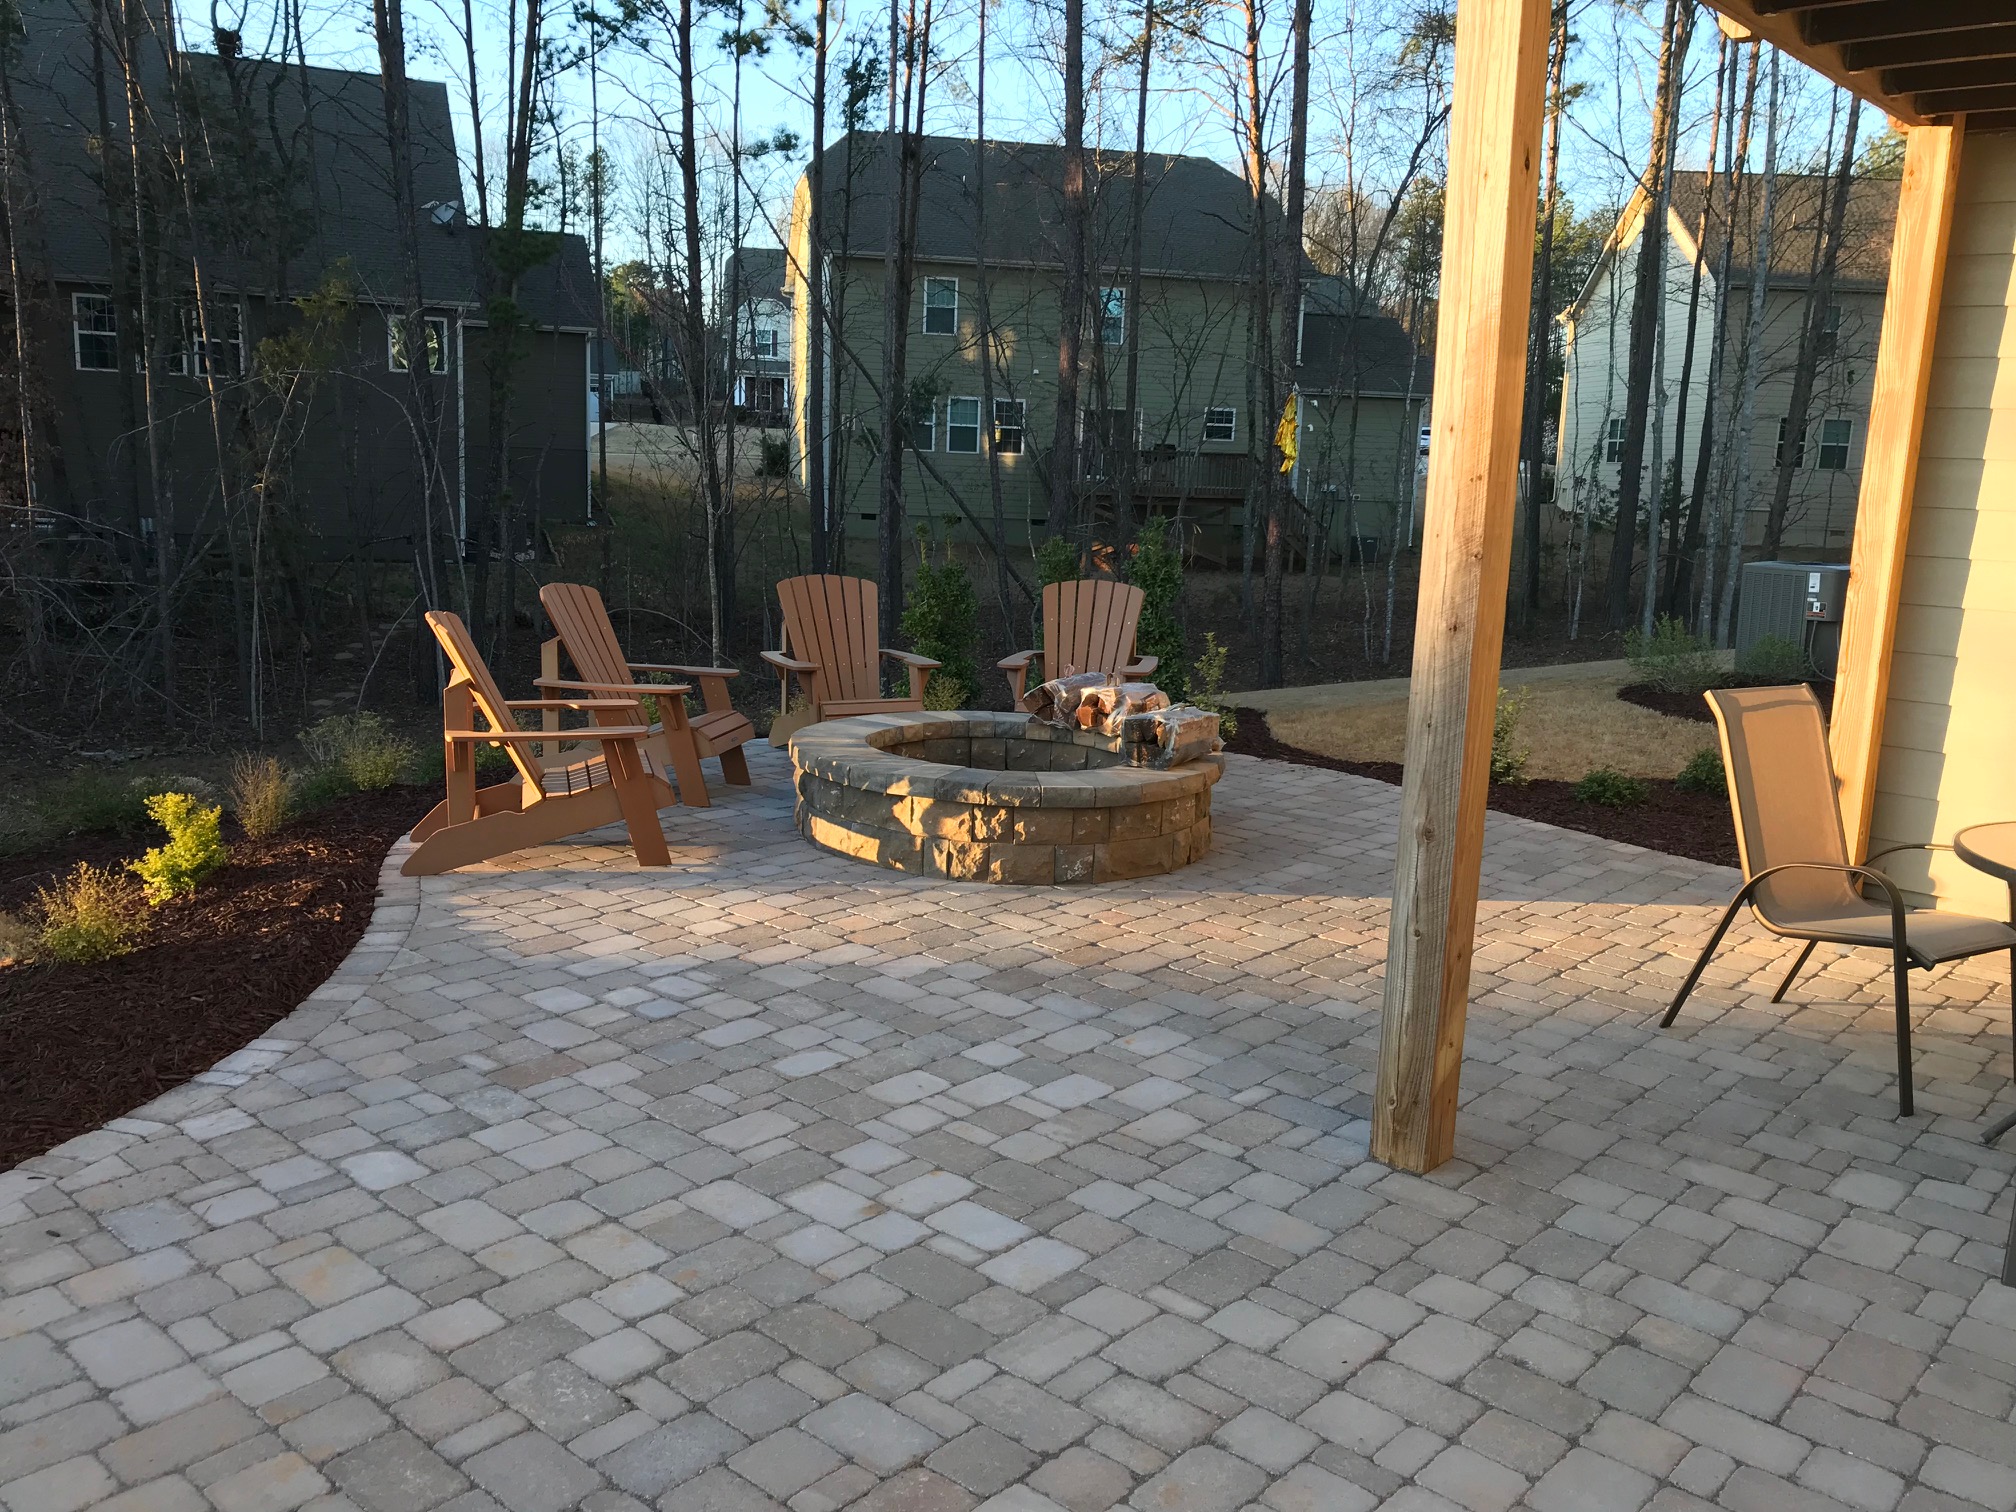 A Belgard Paver Patio, Fire Pit and Landscaping - Mr ...